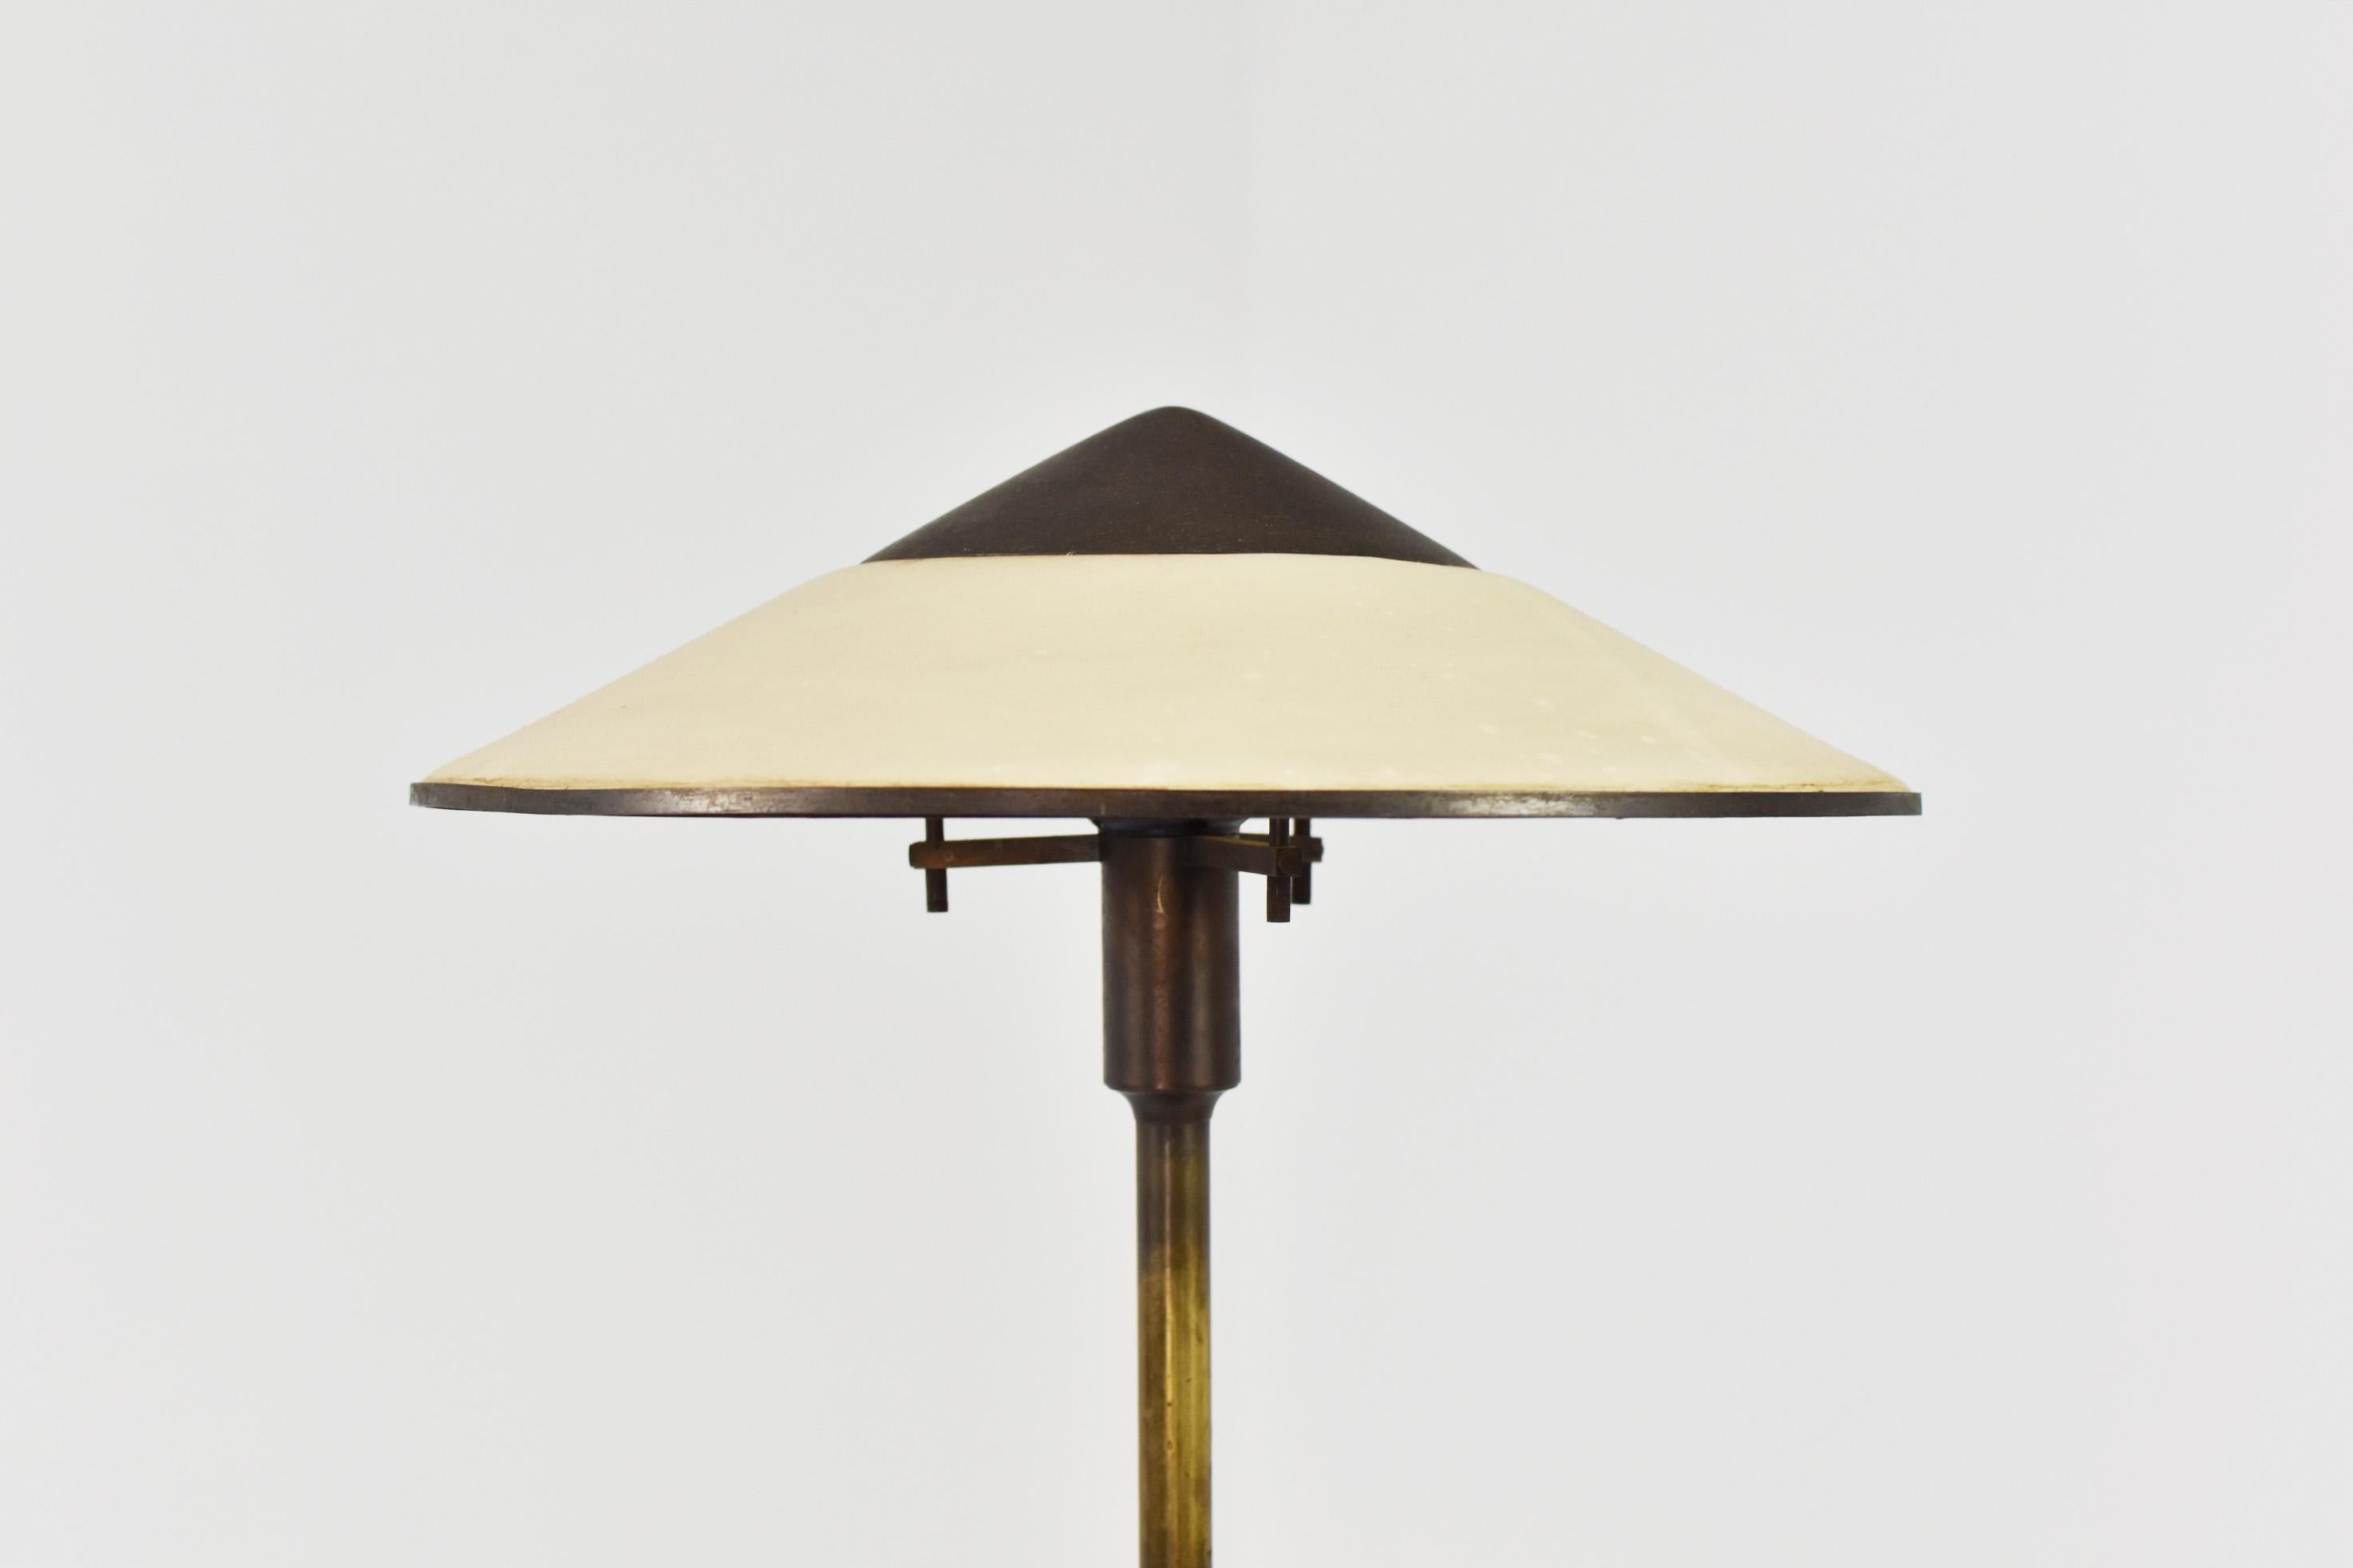 Proud to present you this ultra rare ‘T3’ table lamp by Niels Rasmussen Thykier, Denmark, 1929. Thykier was a Danish sculptor and painter and created the famous ‘T3’ of his Kongelys table lamp series in 1929. Since Fog & Mørup start producing this